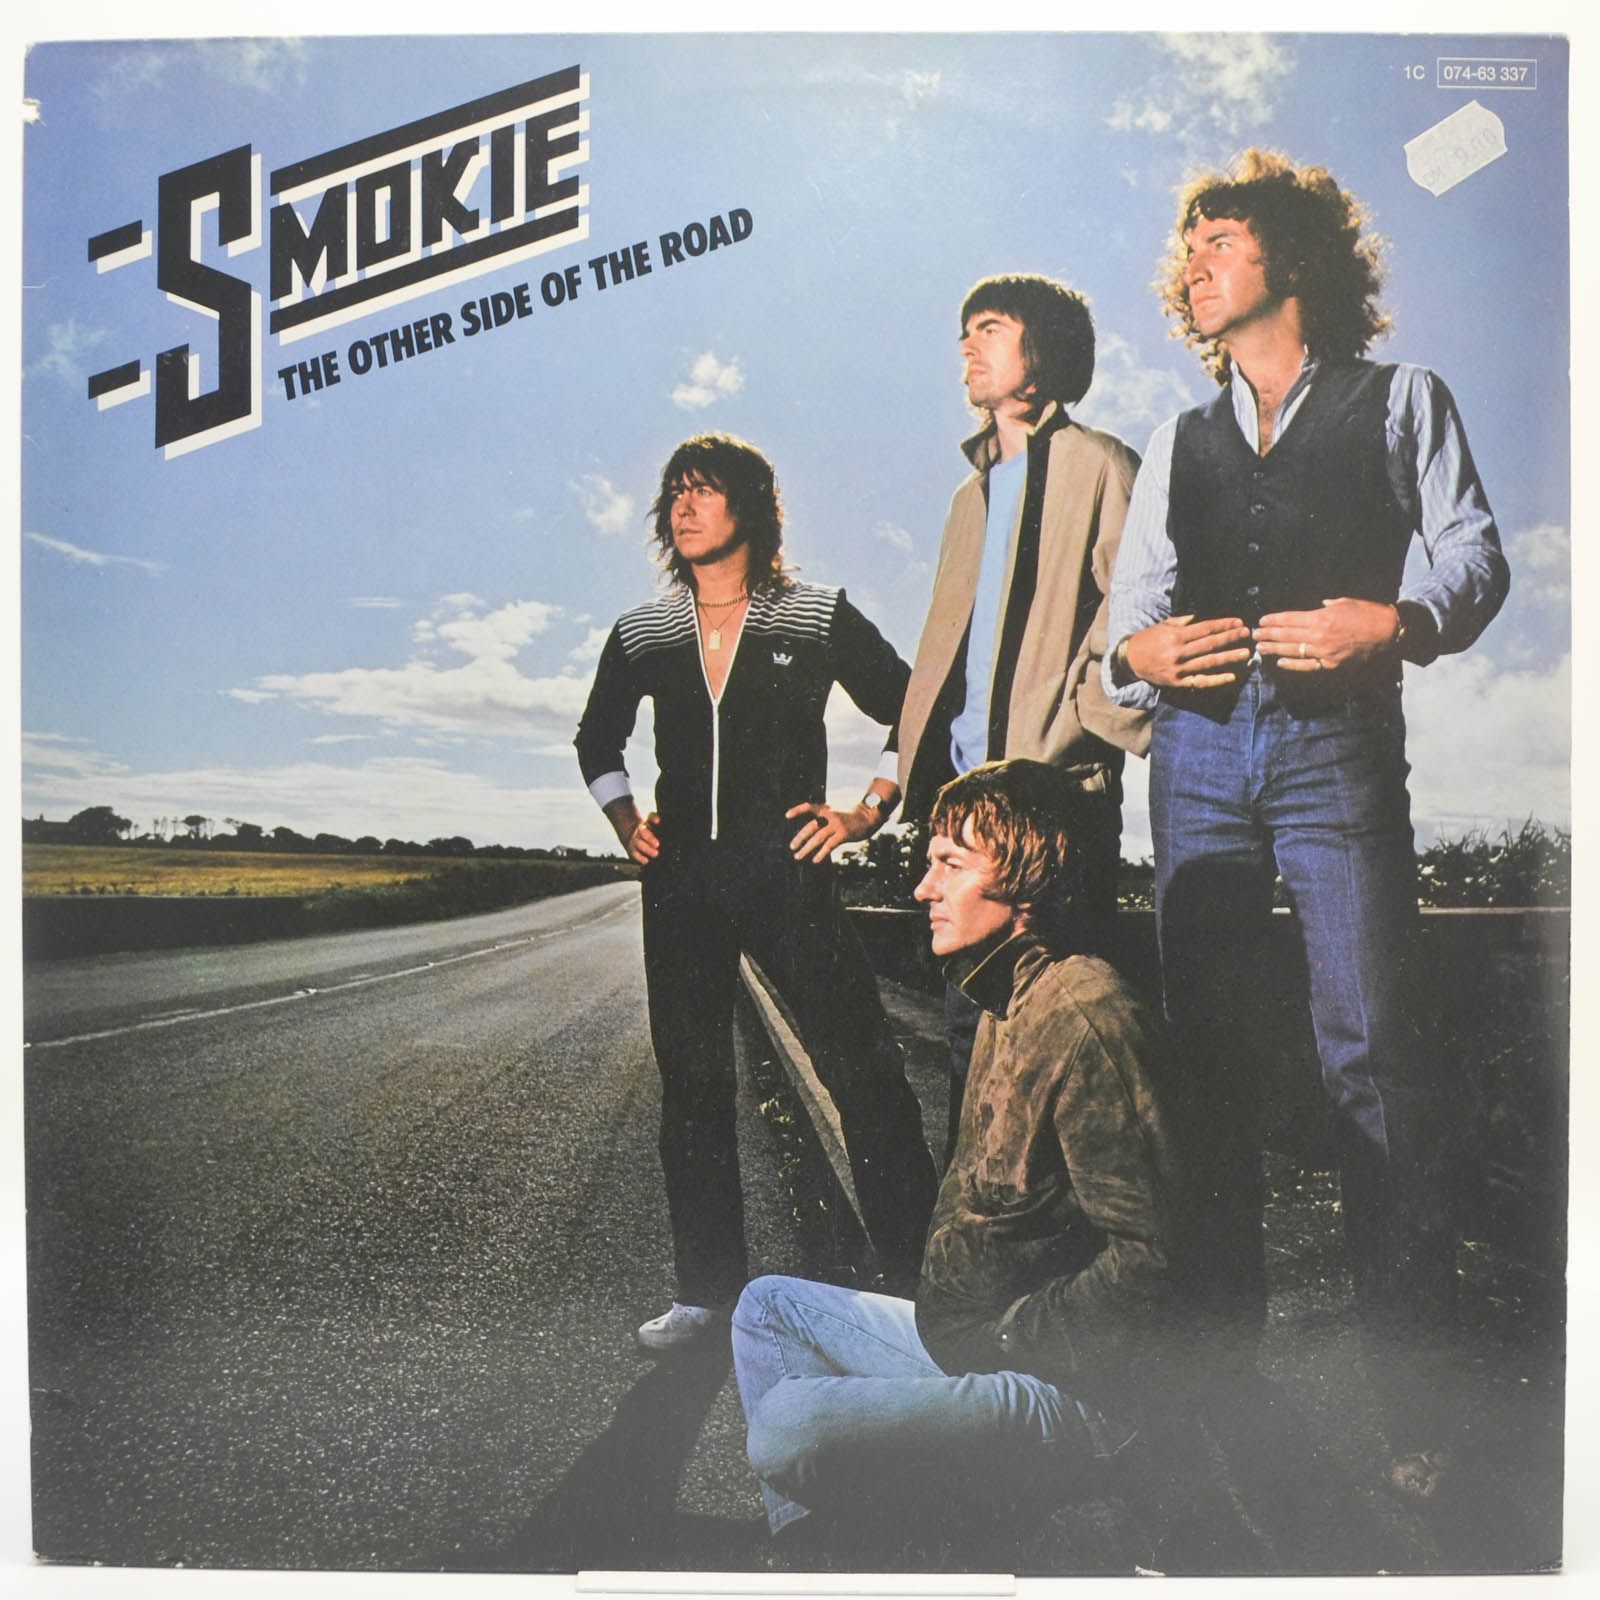 Smokie — The Other Side Of The Road, 1979